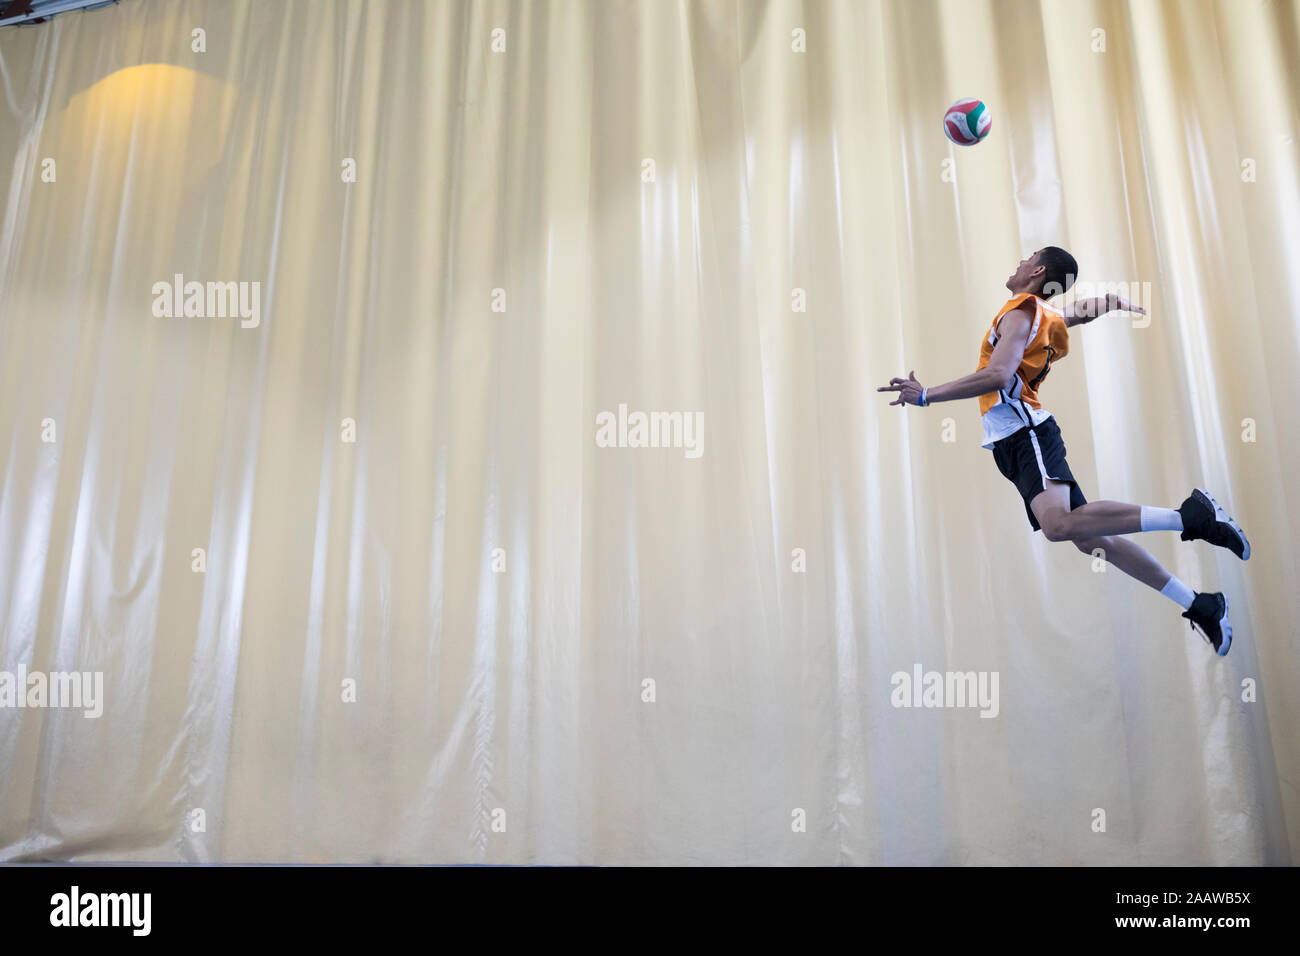 Man jumping during a volleyball match to start a game Stock Photo